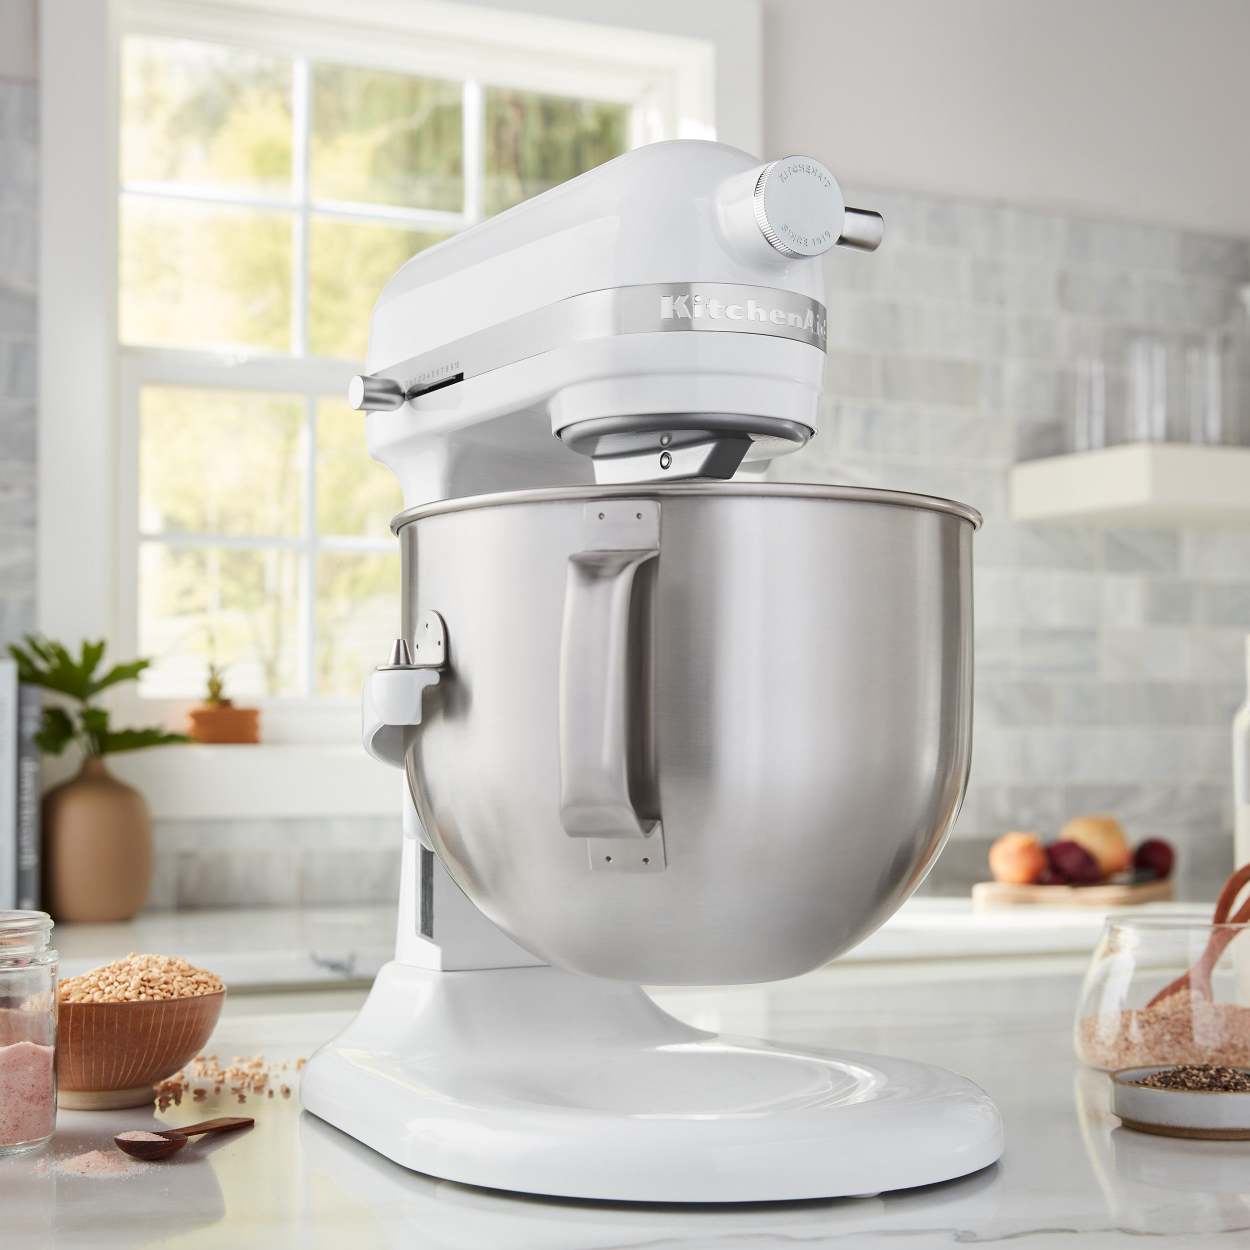 How to Use the KitchenAid Pro Line 7-Qt. Stand Mixer